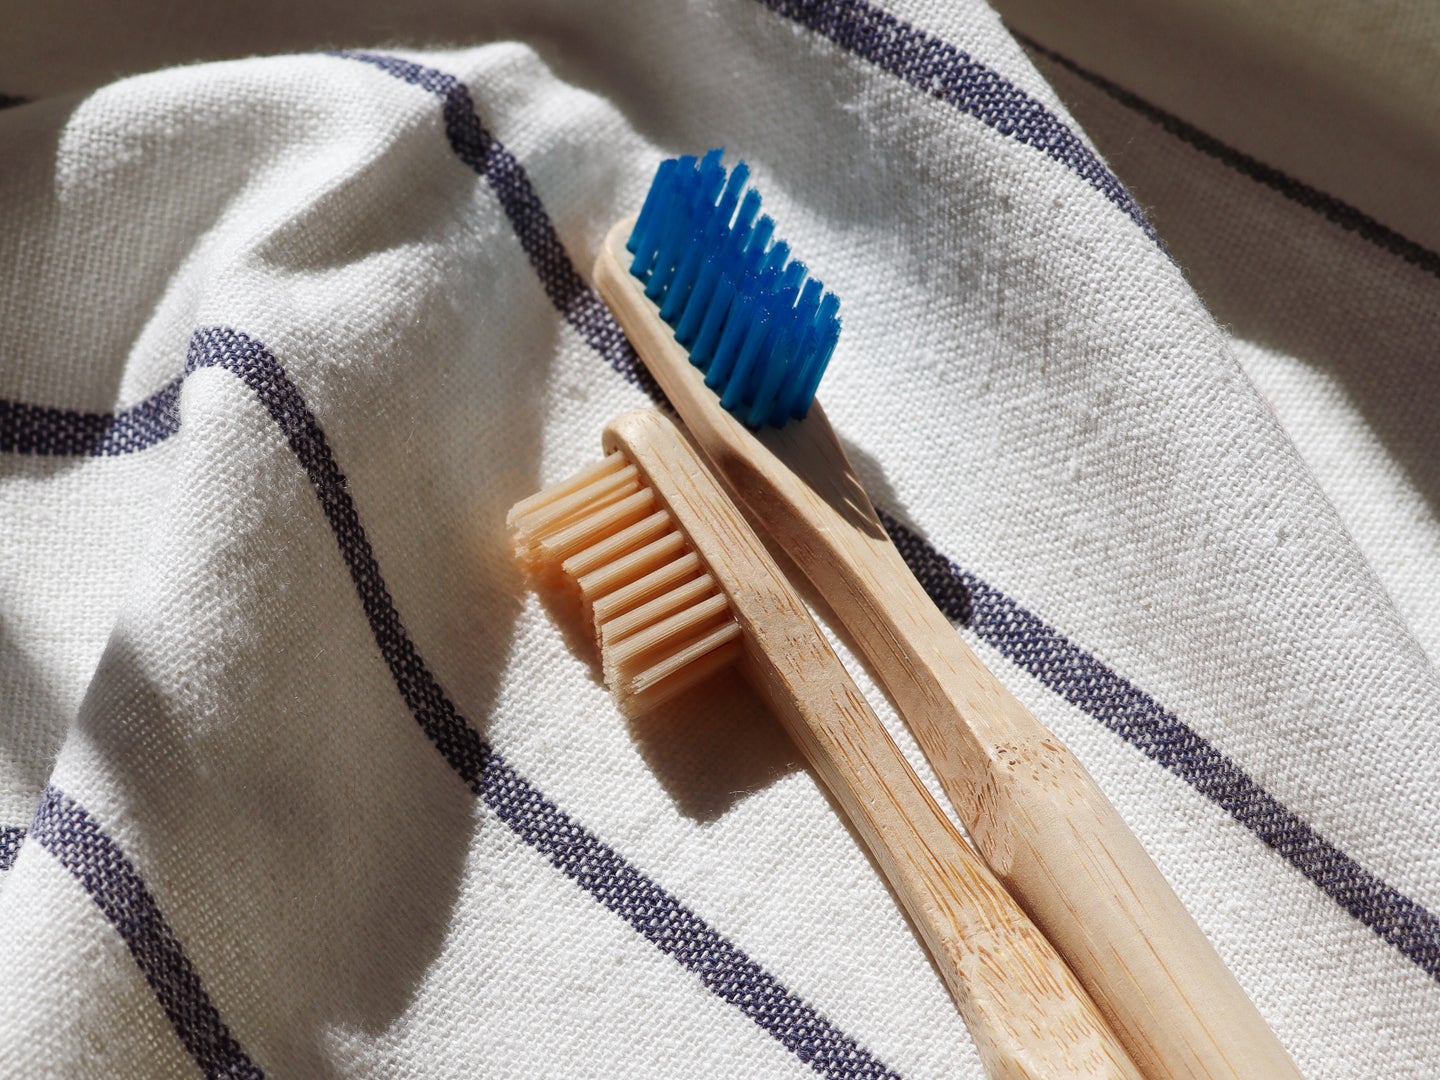 Two bamboo toothbrushes, one with tan bristles and one with blue bristles, on a white towel.